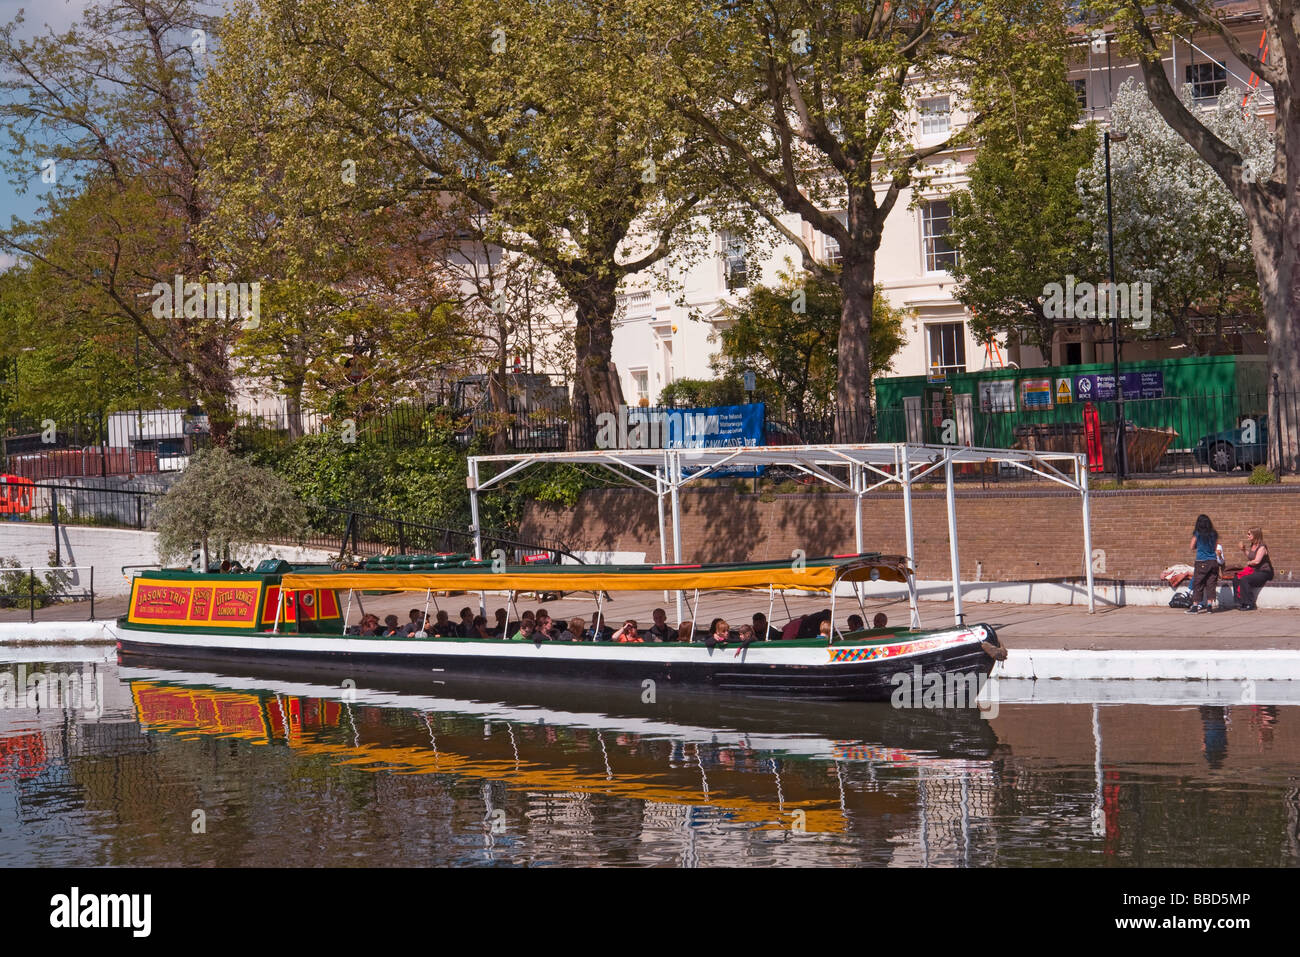 Little Venice, Maida Vale, West London with canal boats Stock Photo